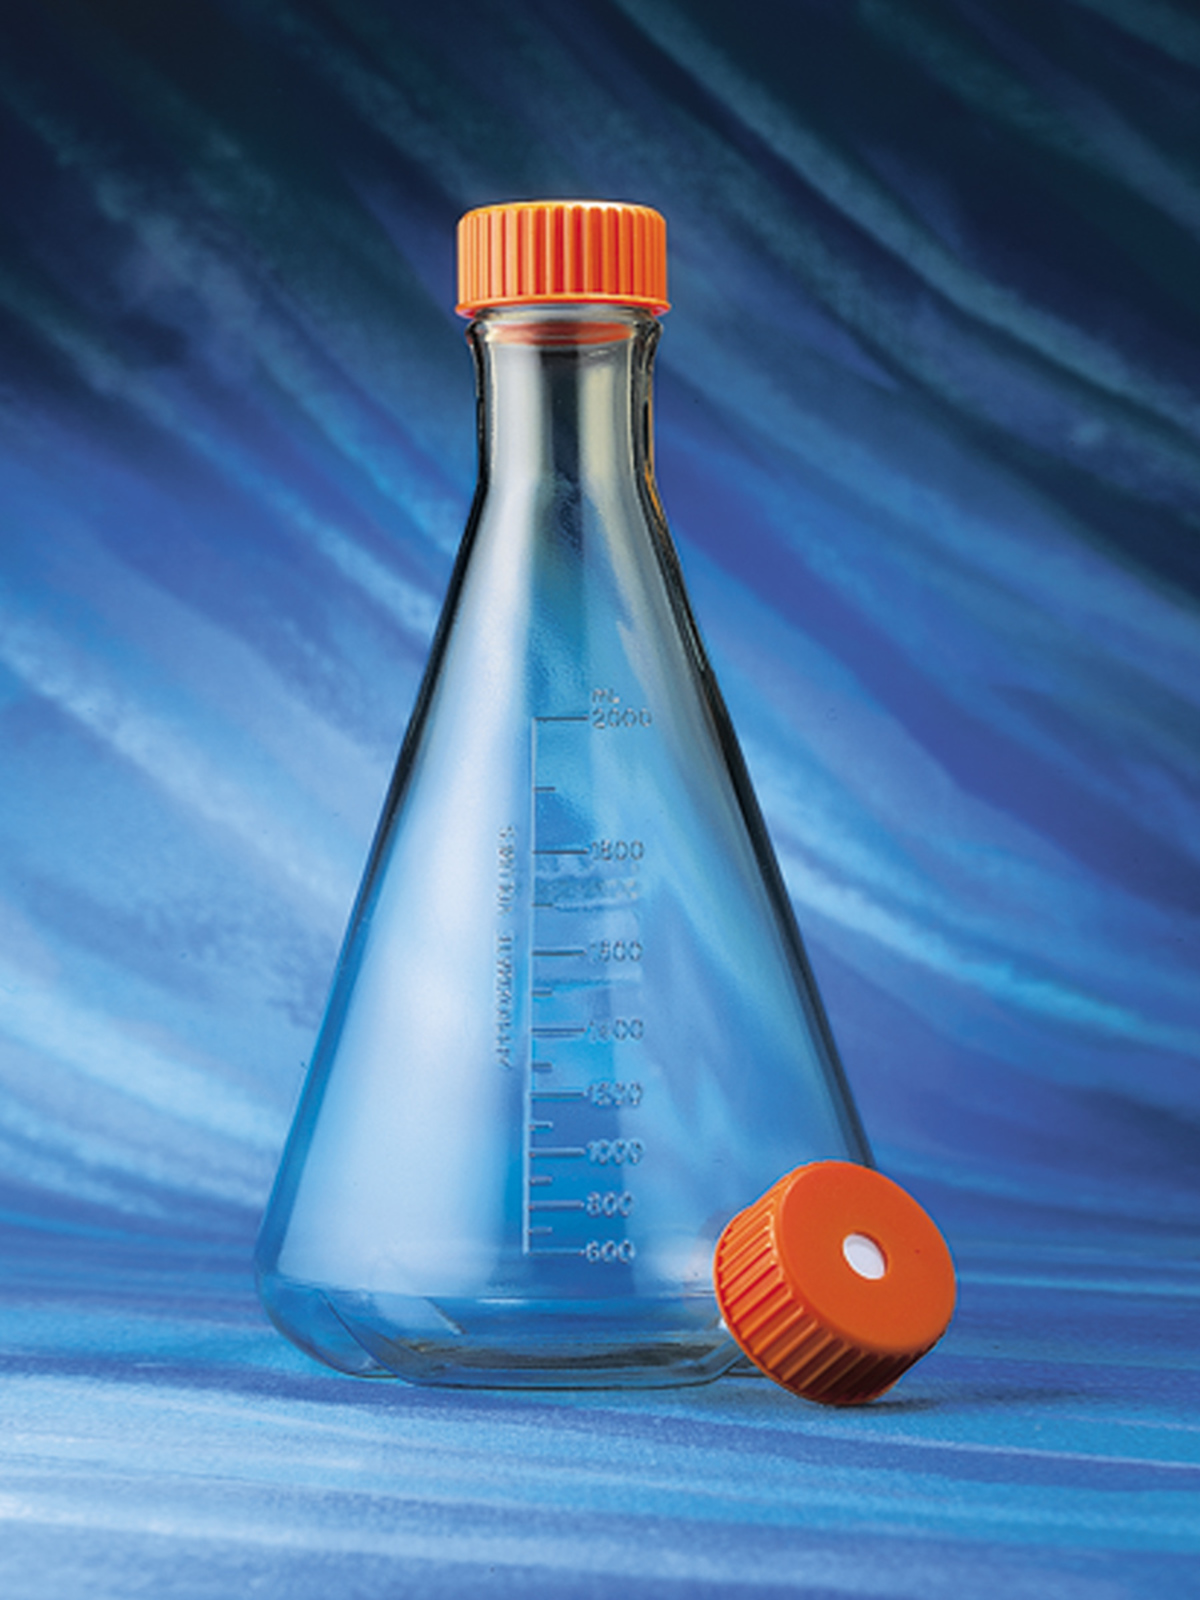 https://www.corning.com/catalog/cls/products/e/erlenmeyerShakerFlasks/431256/images/431256-PDP_A.jpg/_jcr_content/renditions/product.zoom.1200.jpg